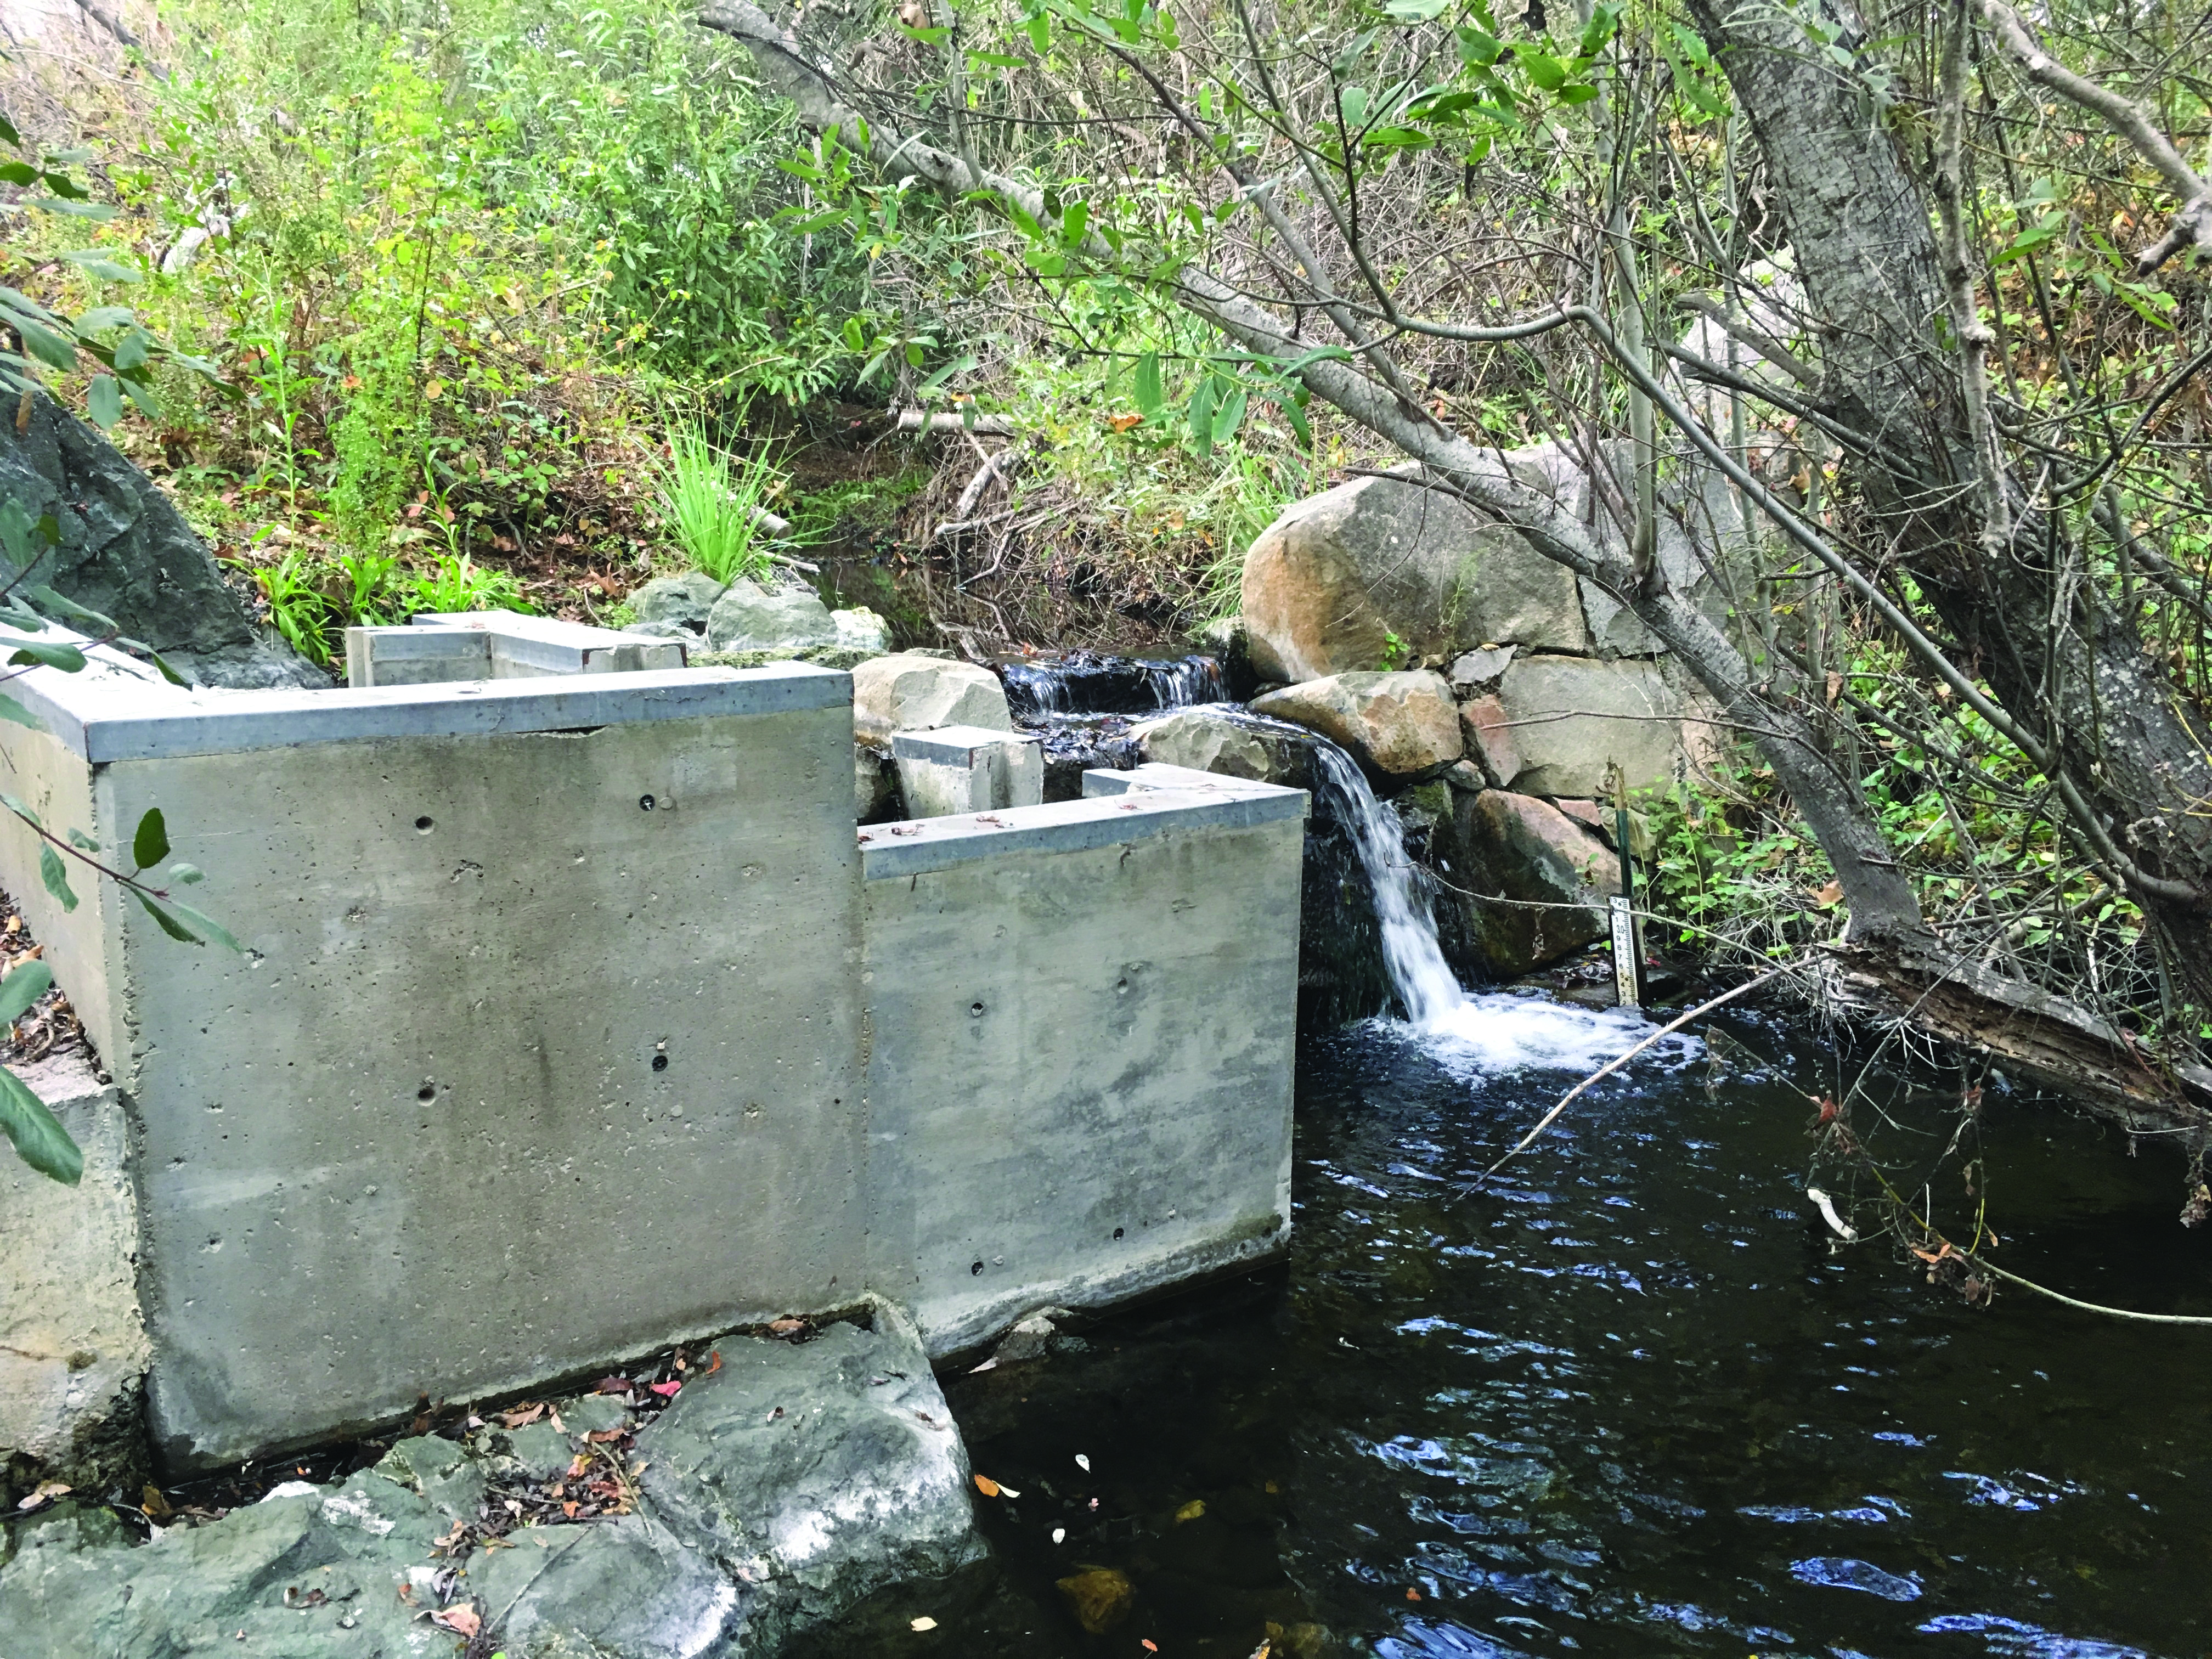 Construction begins next summer to replace this aging concrete passage structure so that fish can access the high quality habitat located upstream.